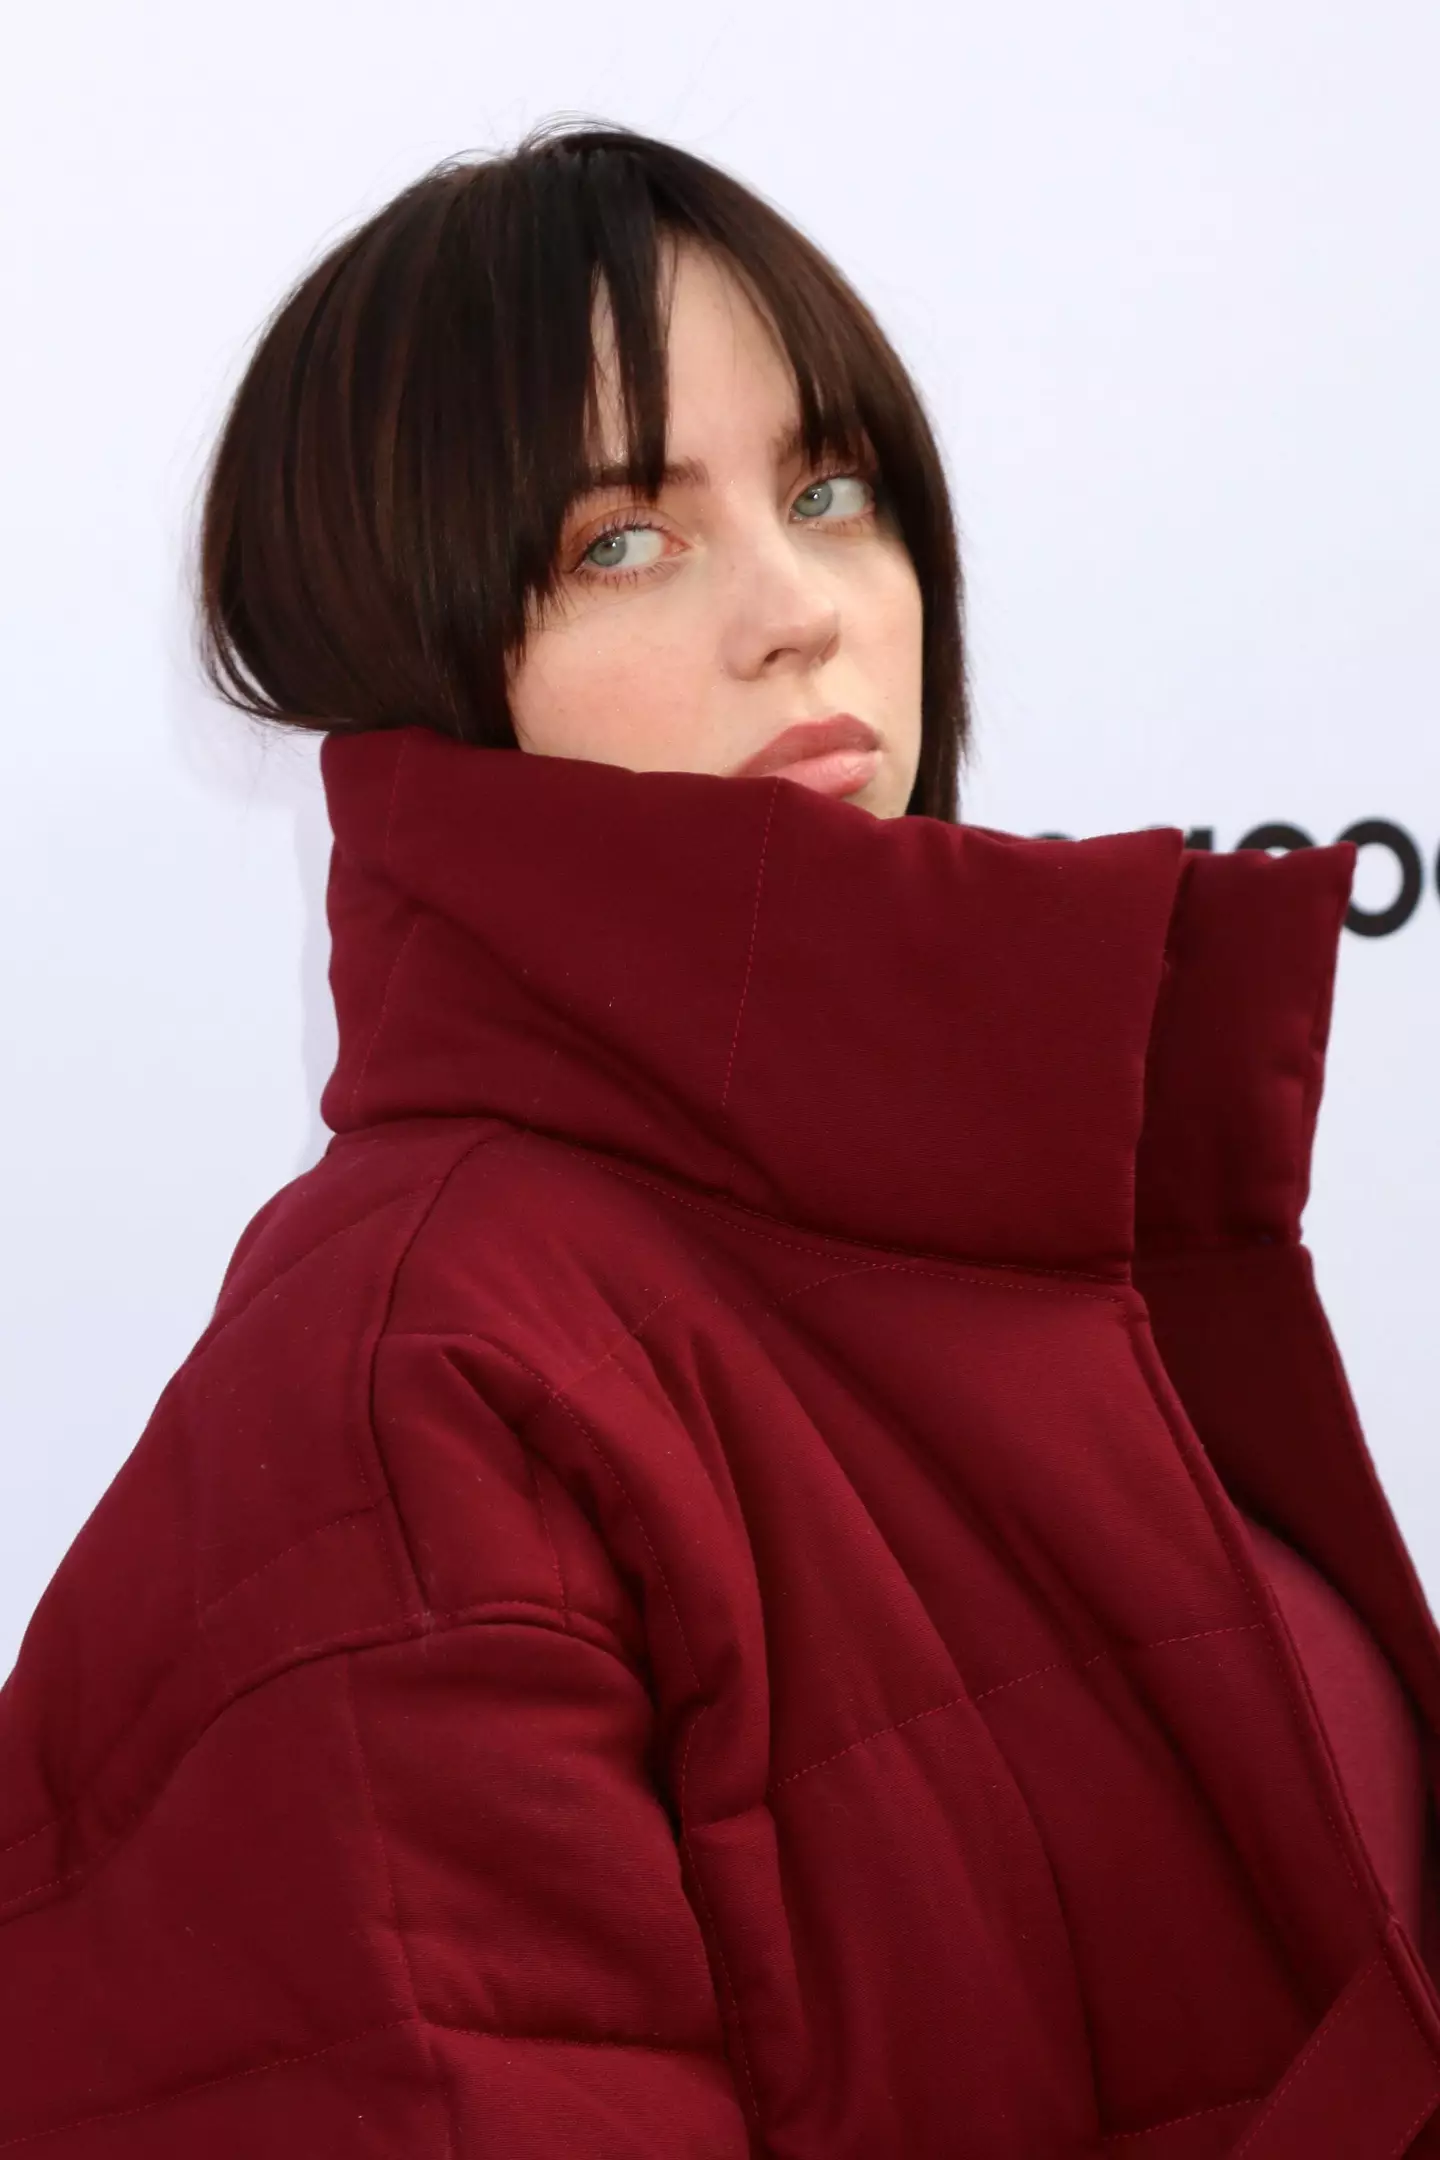 Billie Eilish says she would have died from Covid if she hadn't got vaccinated.